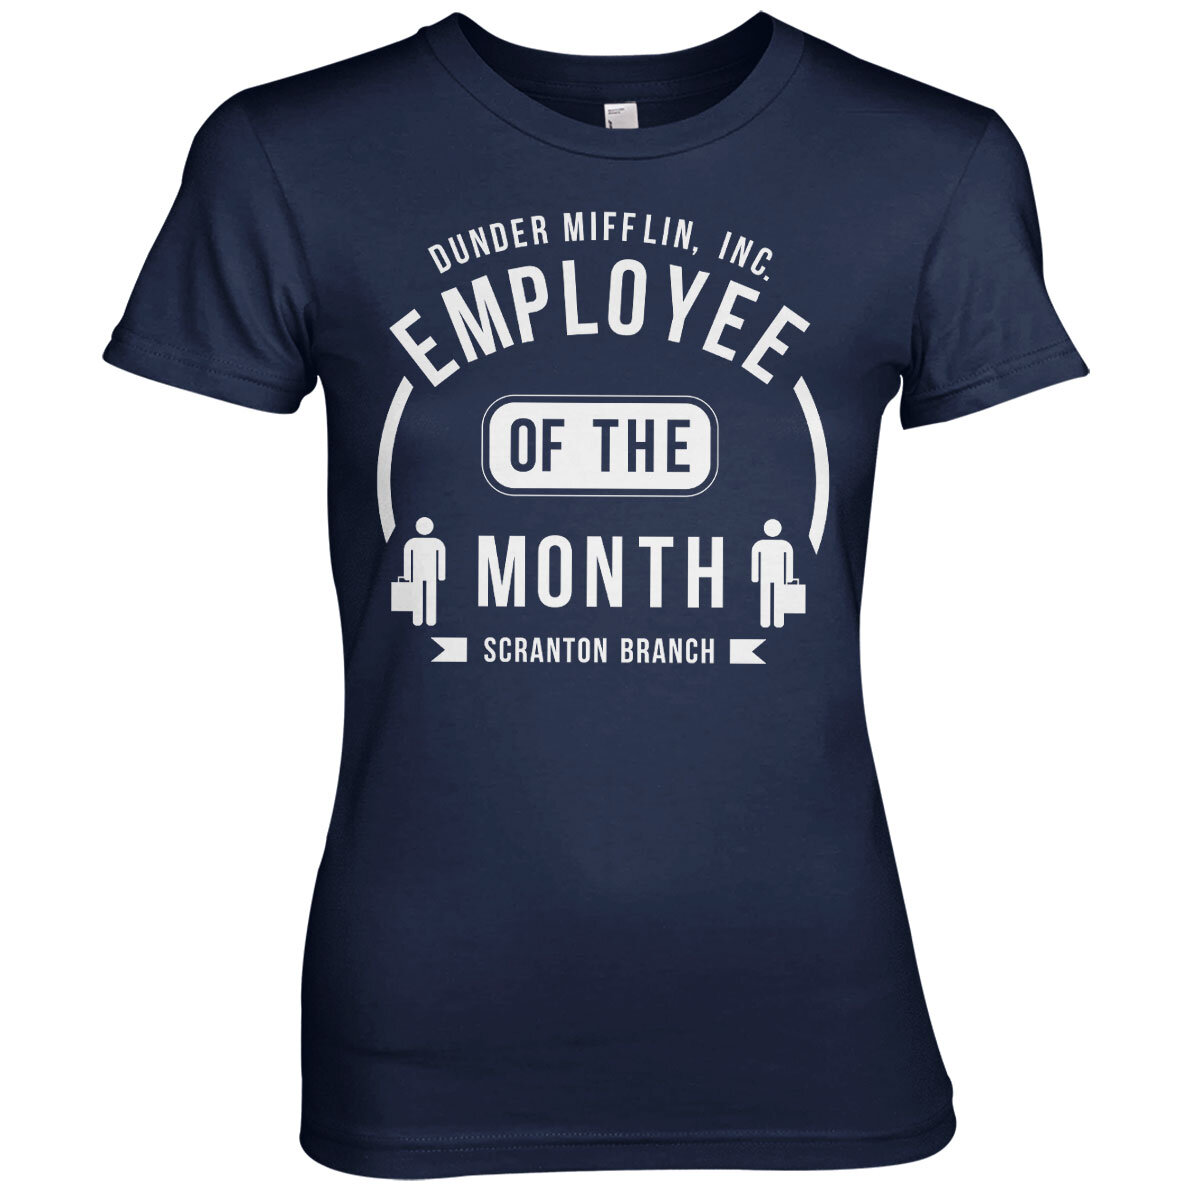 Dunder Mifflin Employee Of The Month Girly Tee